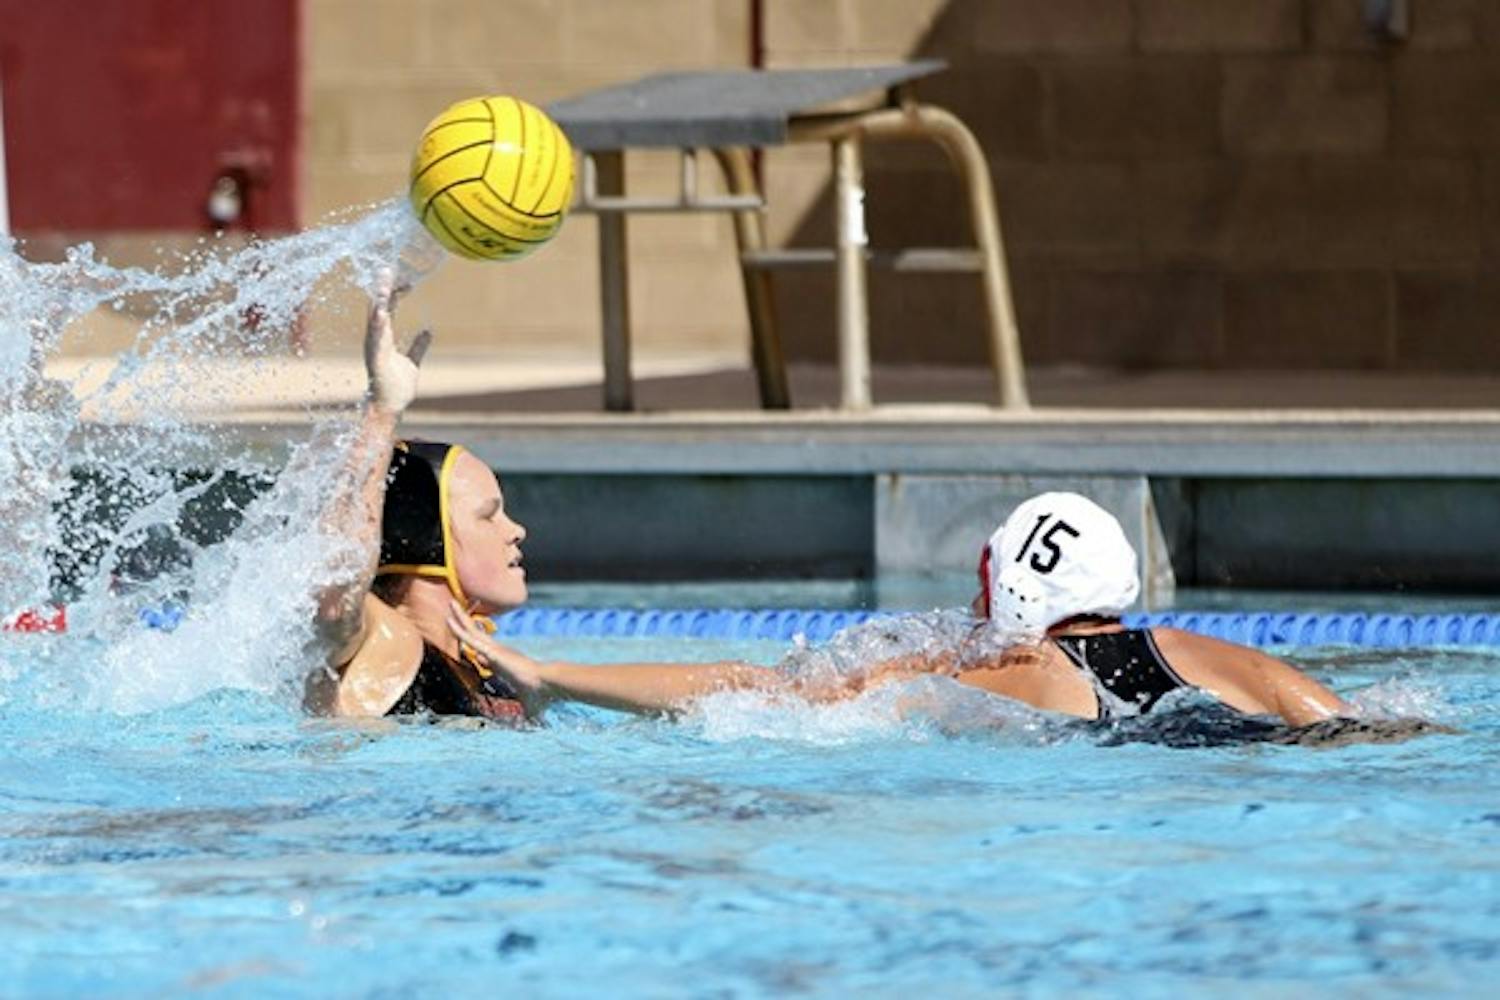 READY, AIM, FIRE: Sophomore attacker Kelsy White prepares to fire a shot on net during a practice earlier this year. The water polo team will begin conference play this weekend against UCLA. (Photo by Serwaa Adu-Tutu)